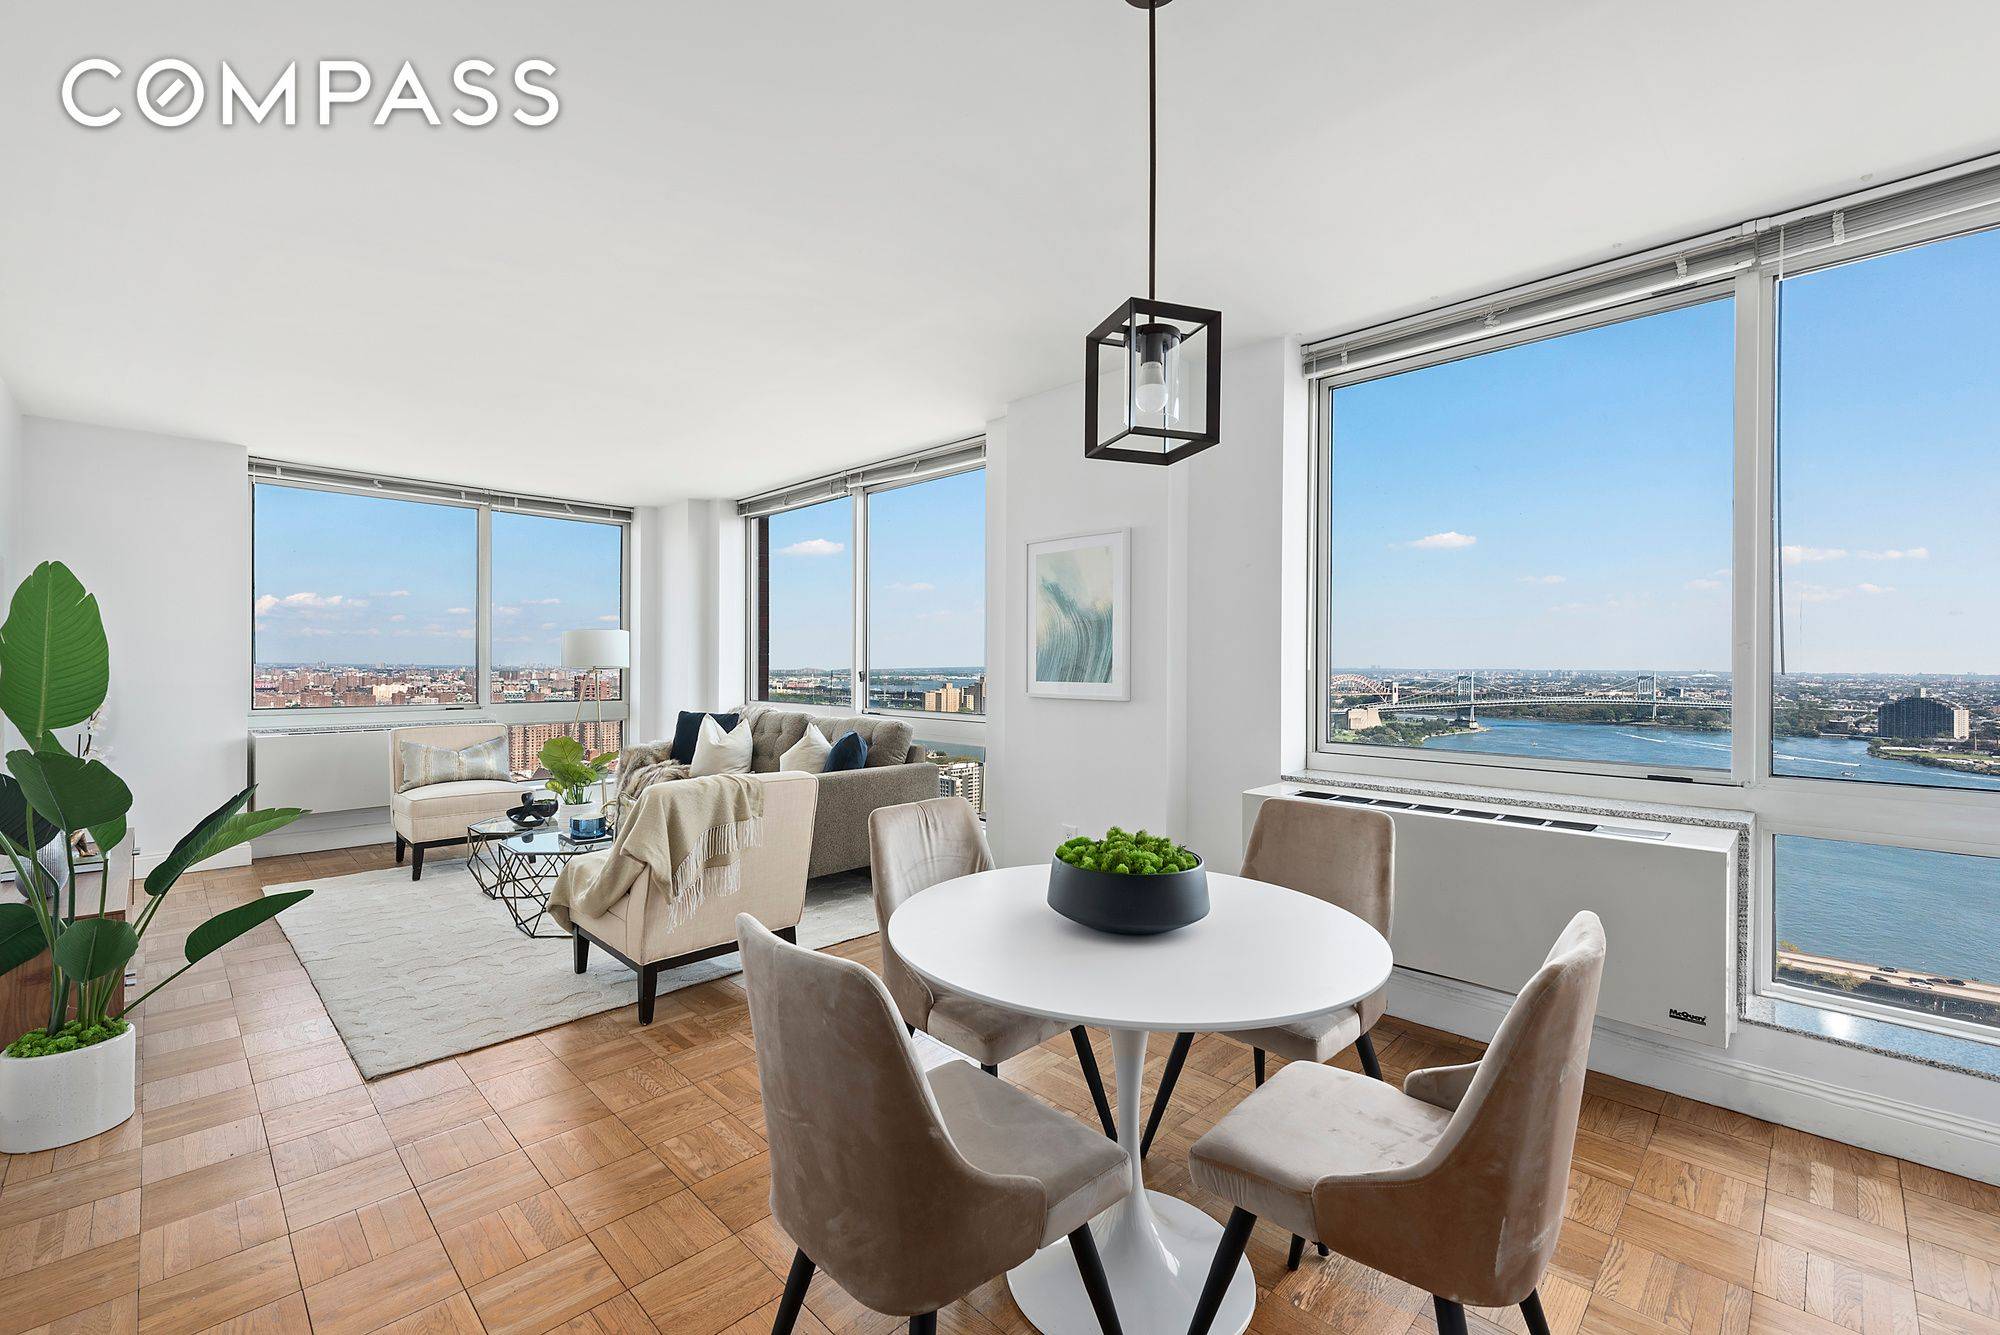 Spectacular views await from every room in this brilliantly designed corner true 3 bedroom, 2.